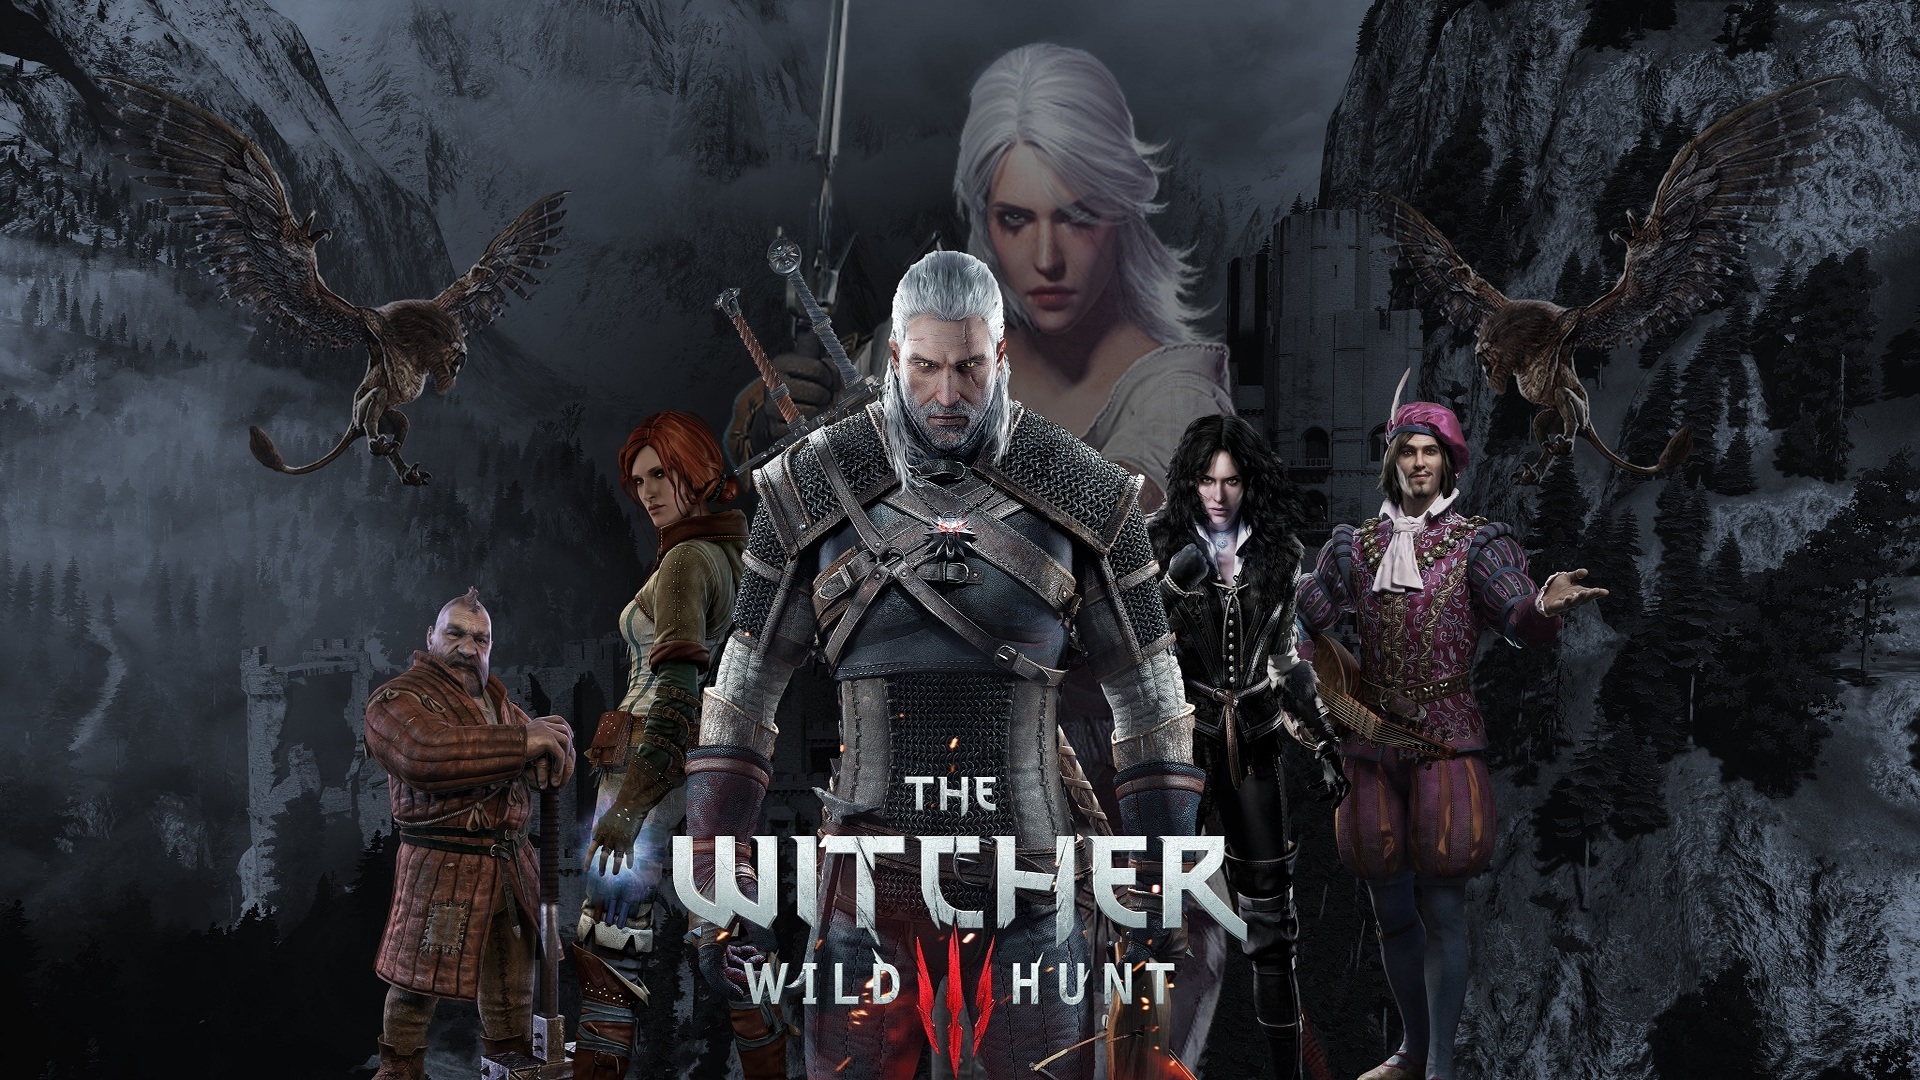 The witcher 3 saves download фото 60